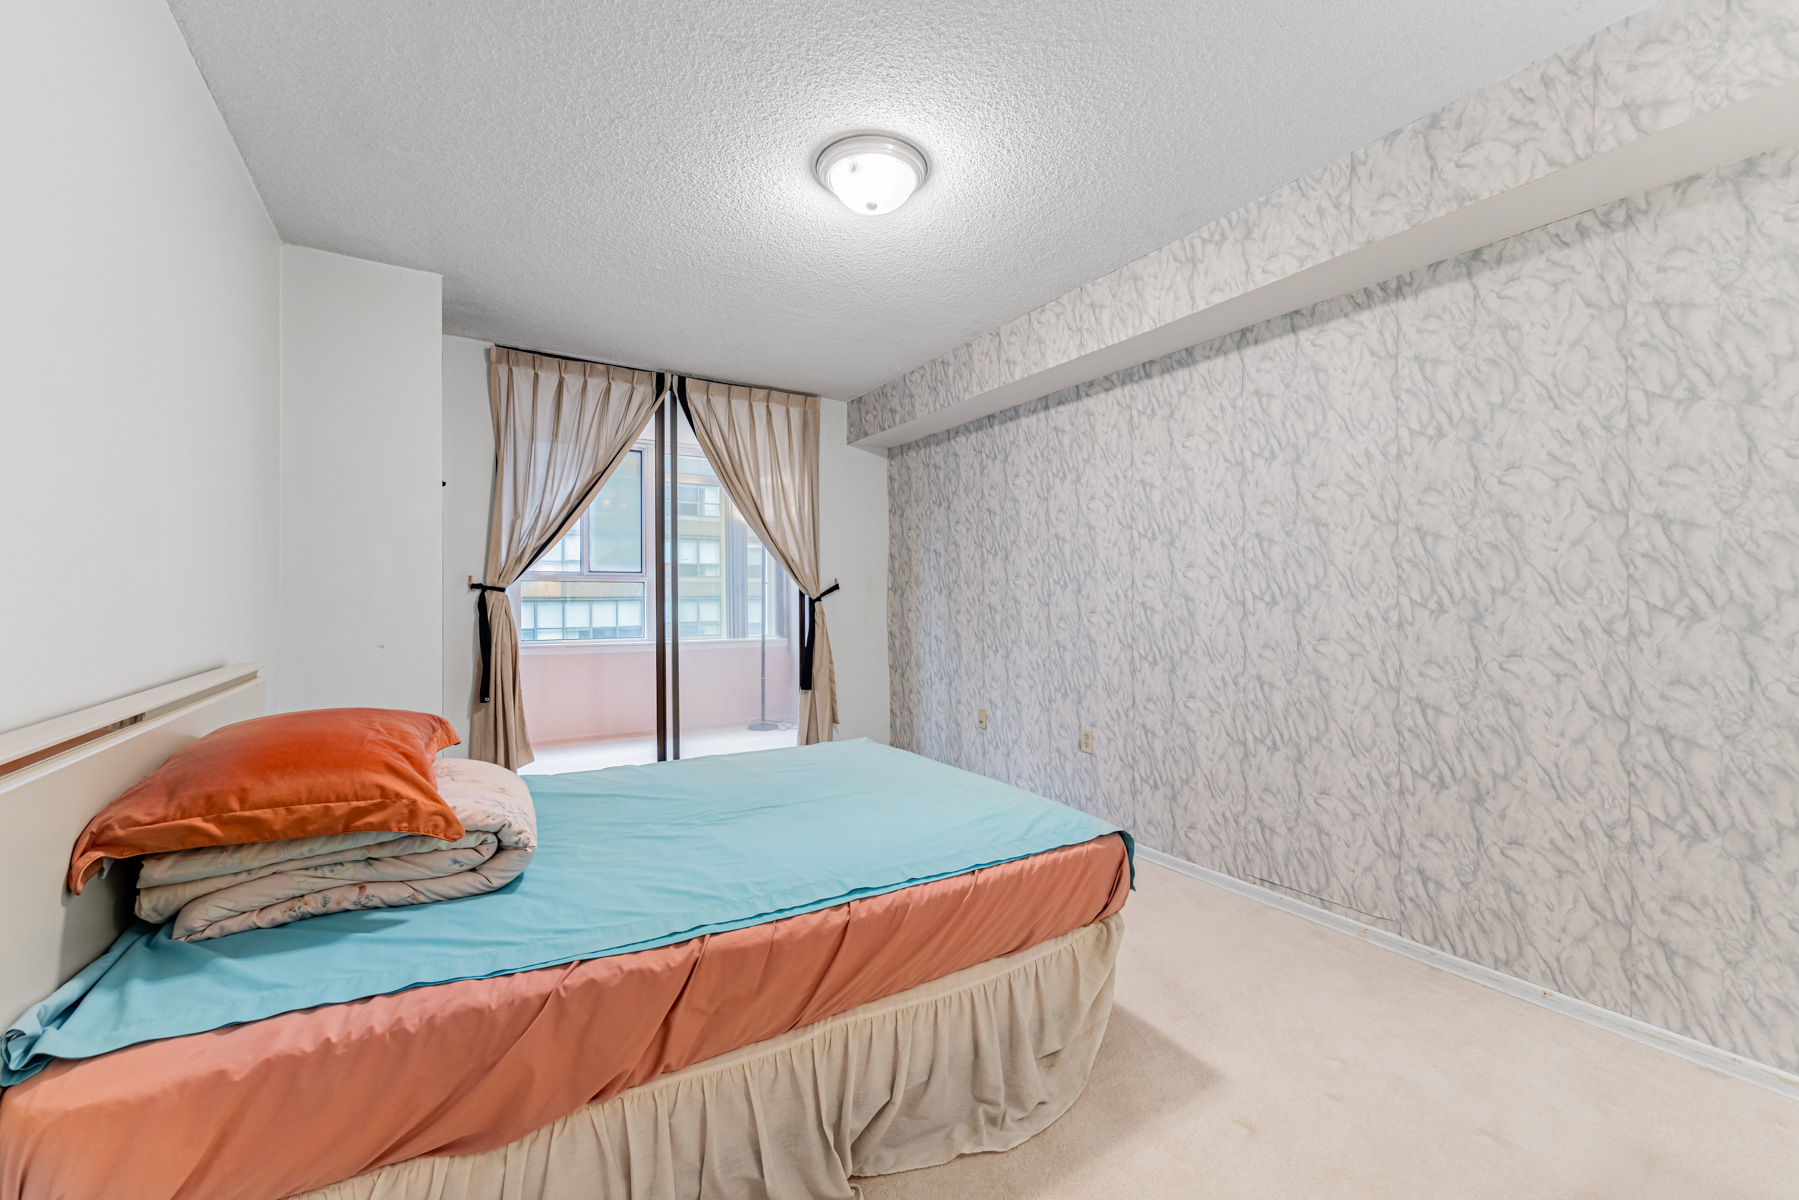 Condo bedroom with broadloom carpet and gray floral wallpaper.